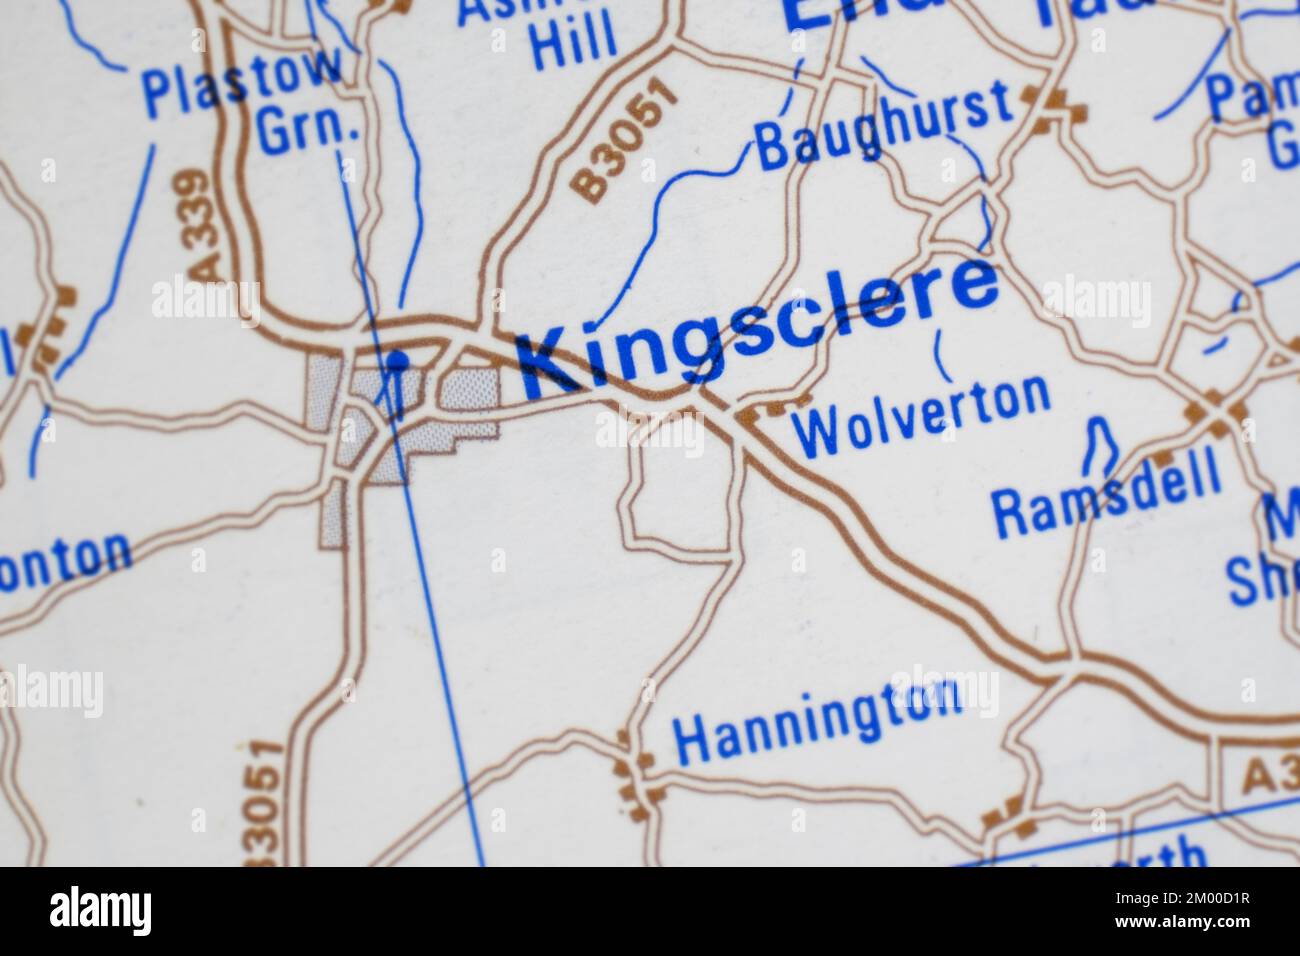 Kingsclere  village in Hampshire, United Kingdom atlas map town name Stock Photo